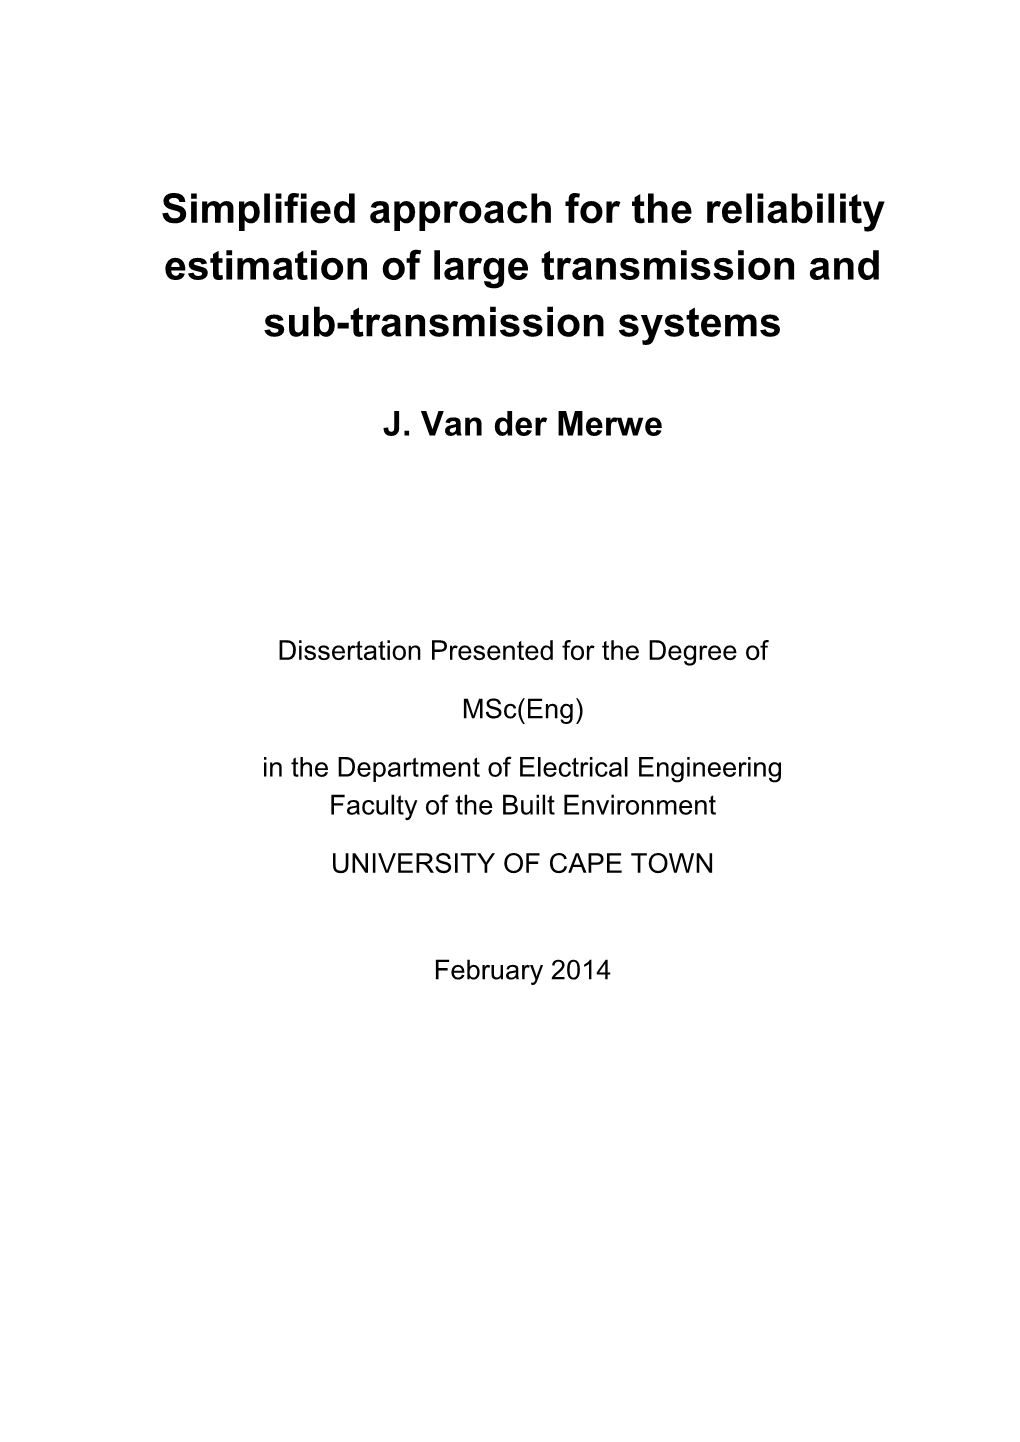 Simplified Approach for the Reliability Estimation of Large Transmission and Sub-Transmission Systems